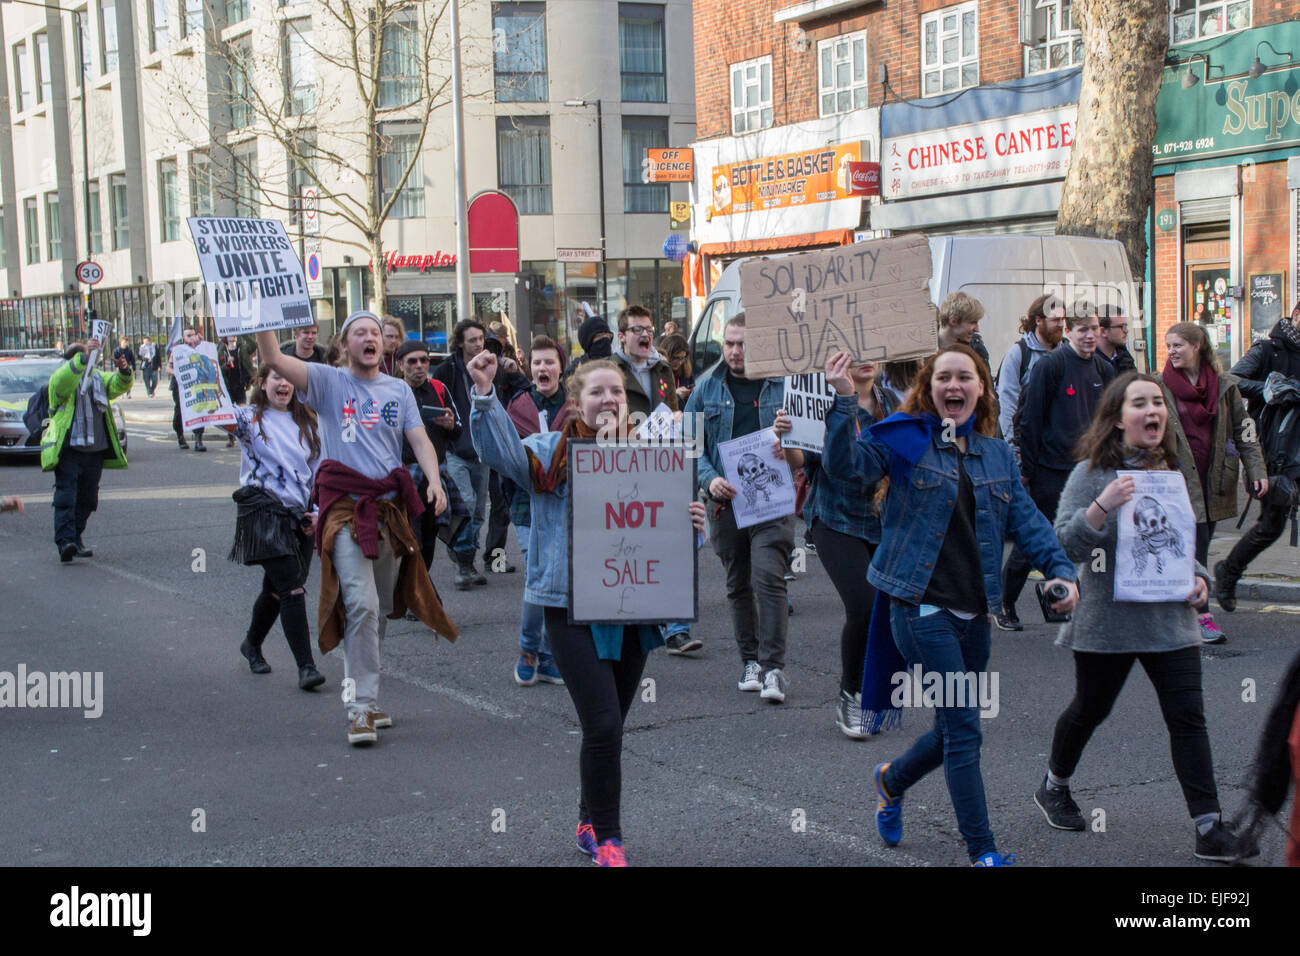 London, UK.  25th March, 2015. Students, education workers and supporters marched from London School of Economics (LSE) to the London College of Communication (LCC) in Elephant and Castle, under the banner of ‘March to stop the cuts at UAL: free education for all’ The demonstration is aimed primarily at protesting a series of devastating cuts to Foundation courses at UAL, but is also themed around a broader fight for free and democratic education. The march will demand that the cuts are cancelled, Credit:  Paul Mendoza/Alamy Live News Stock Photo